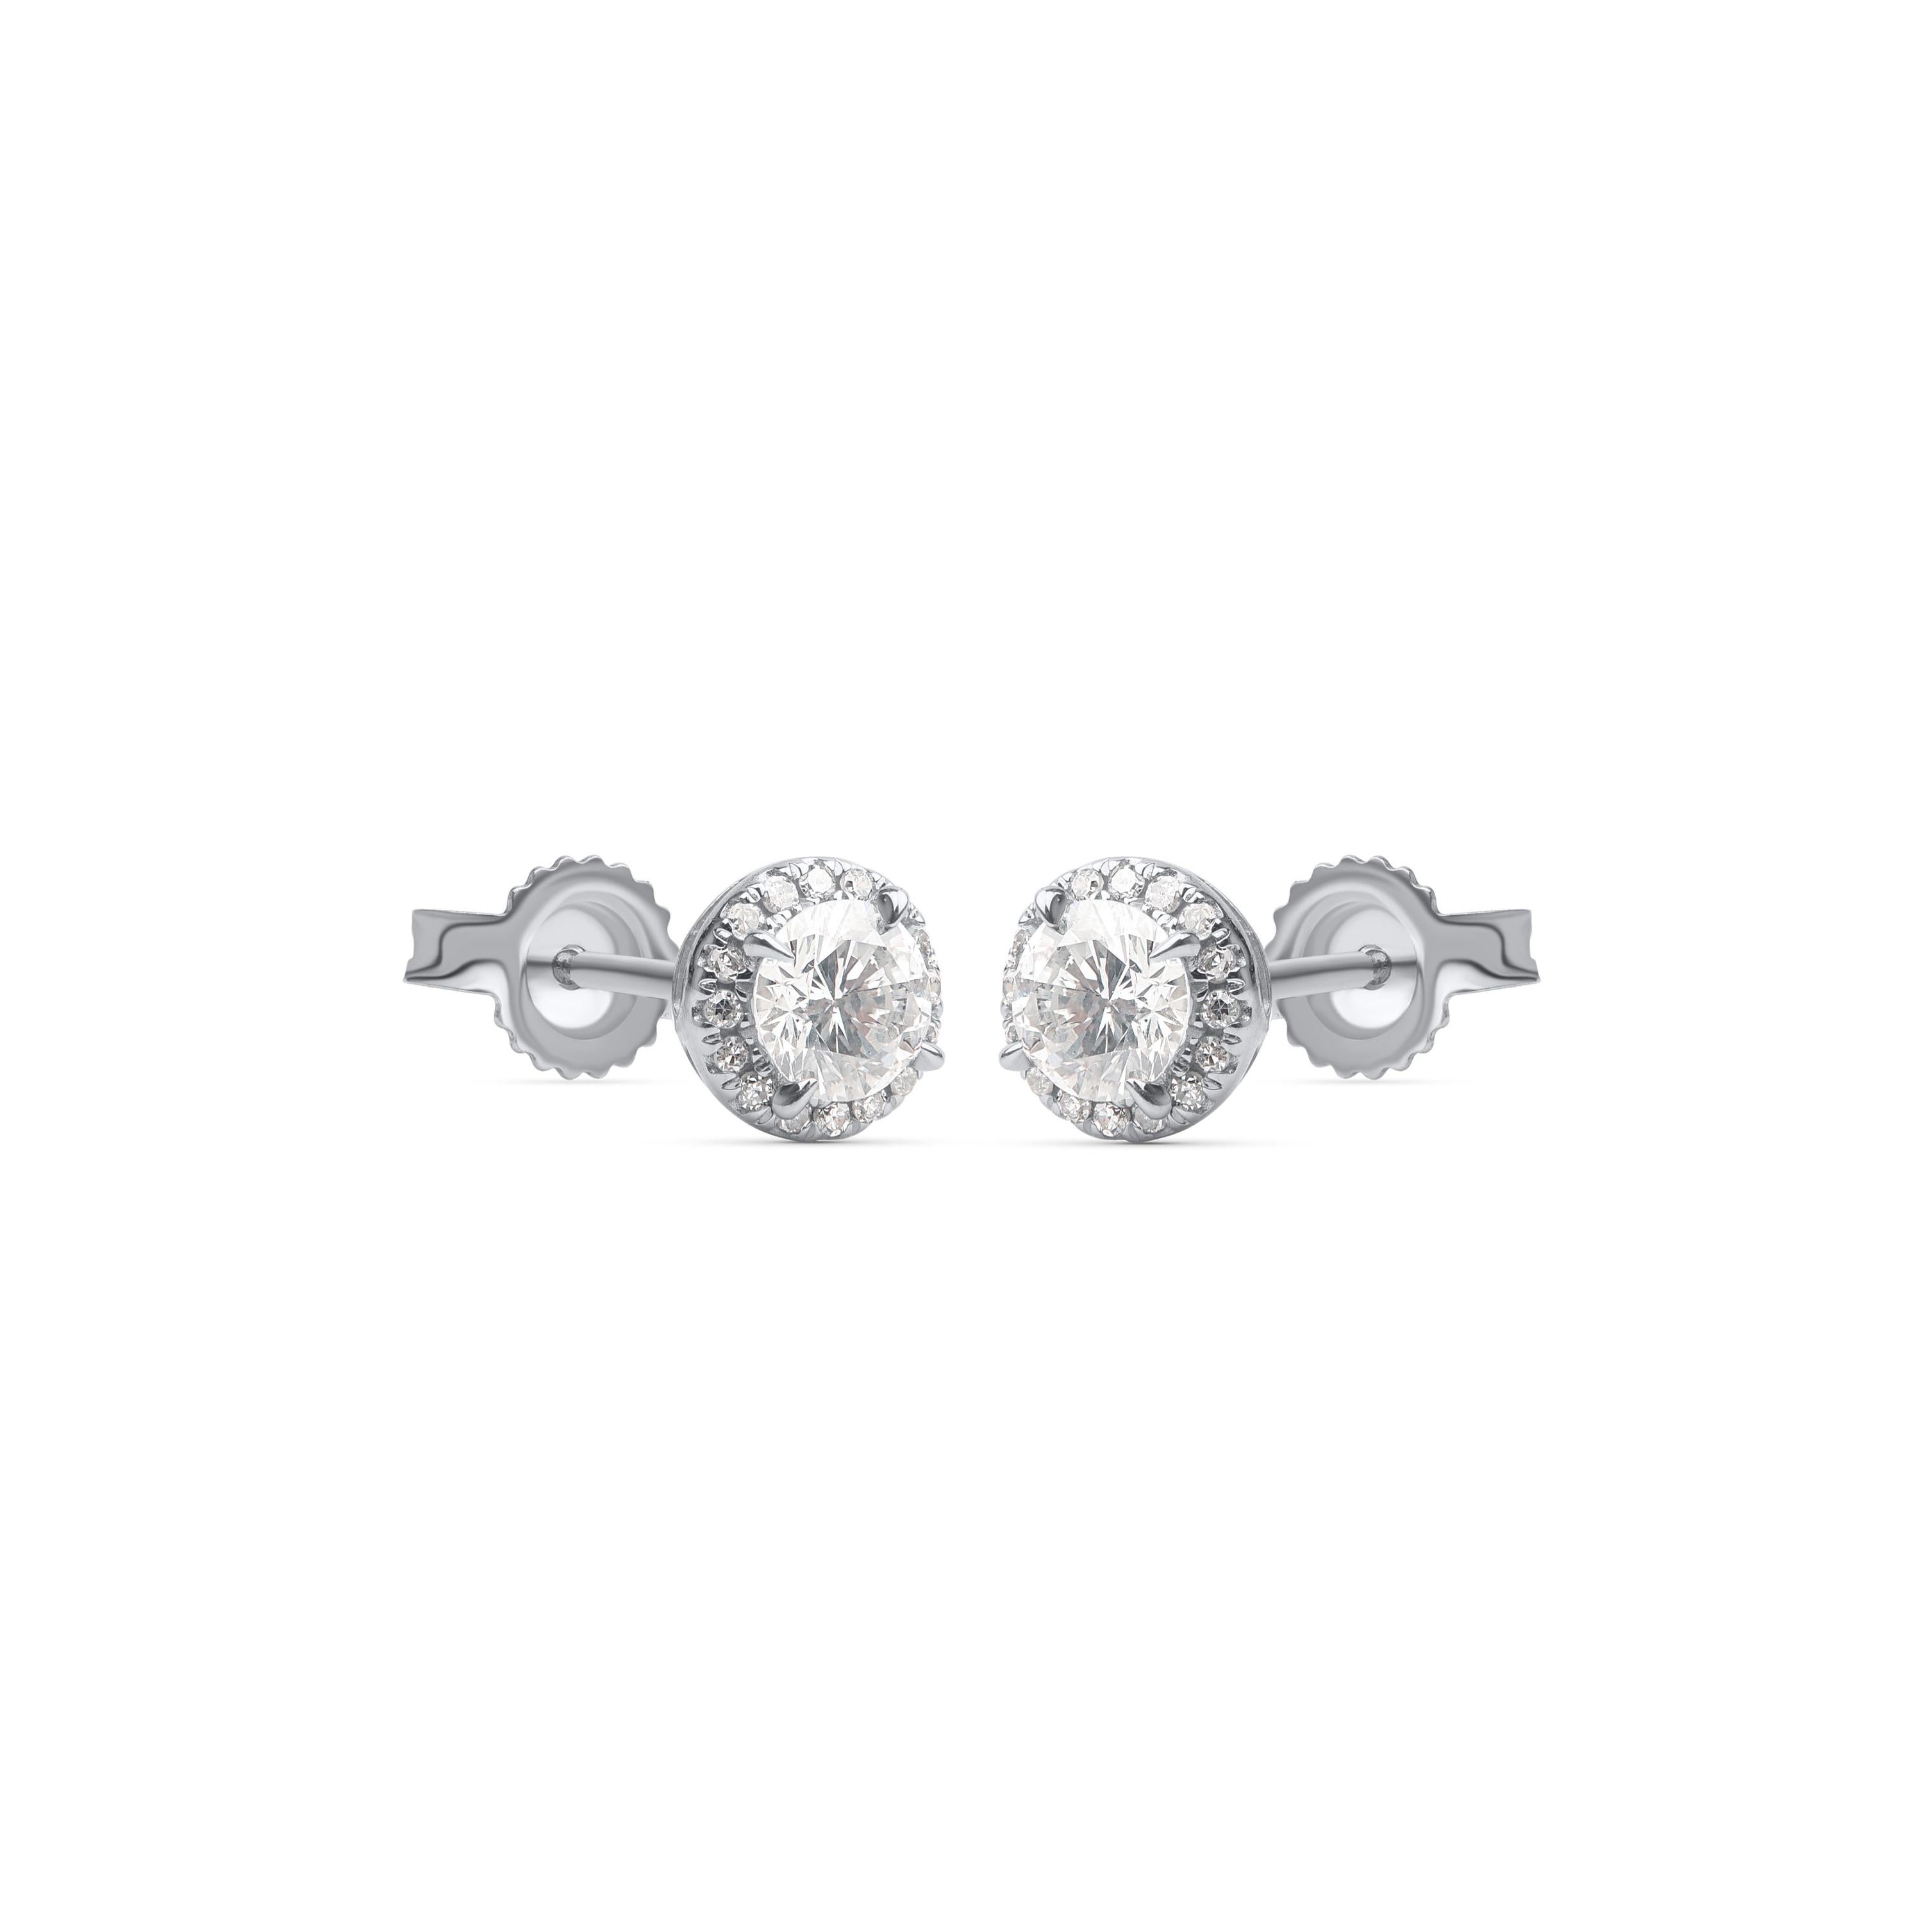 These stud earrings feature 36 natural brilliant cut diamonds set in prong setting and are handcrafted by our in-house experts, crafted in 10-karat white gold. These diamond stud earrings look classic and elegant. The diamonds are graded H-I Color,